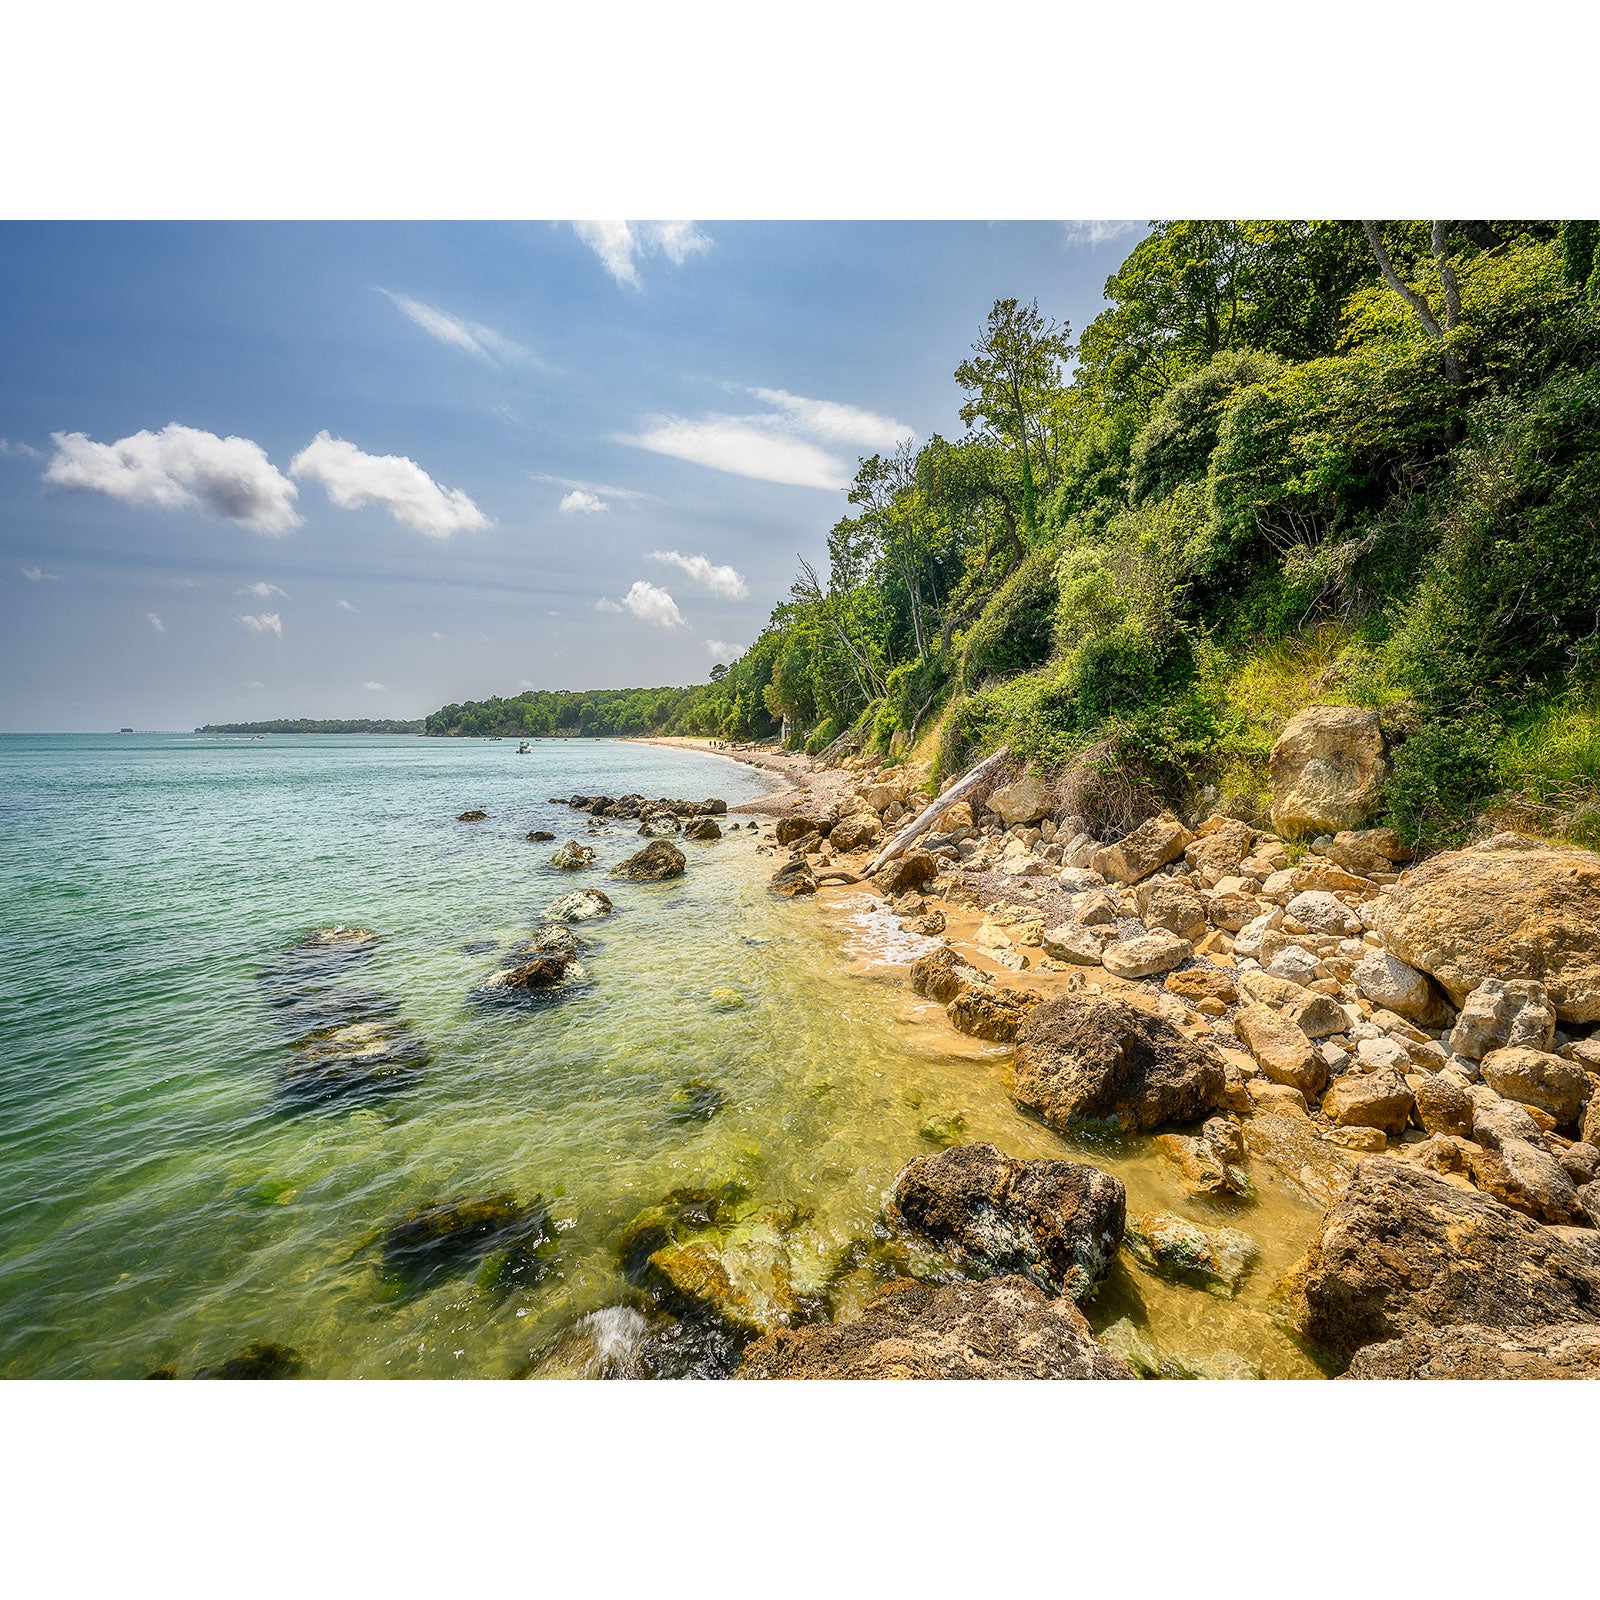 A serene coastline on the Isle of Wight with a rocky shore under a clear blue sky captured by Available Light Photography's Priory Bay.